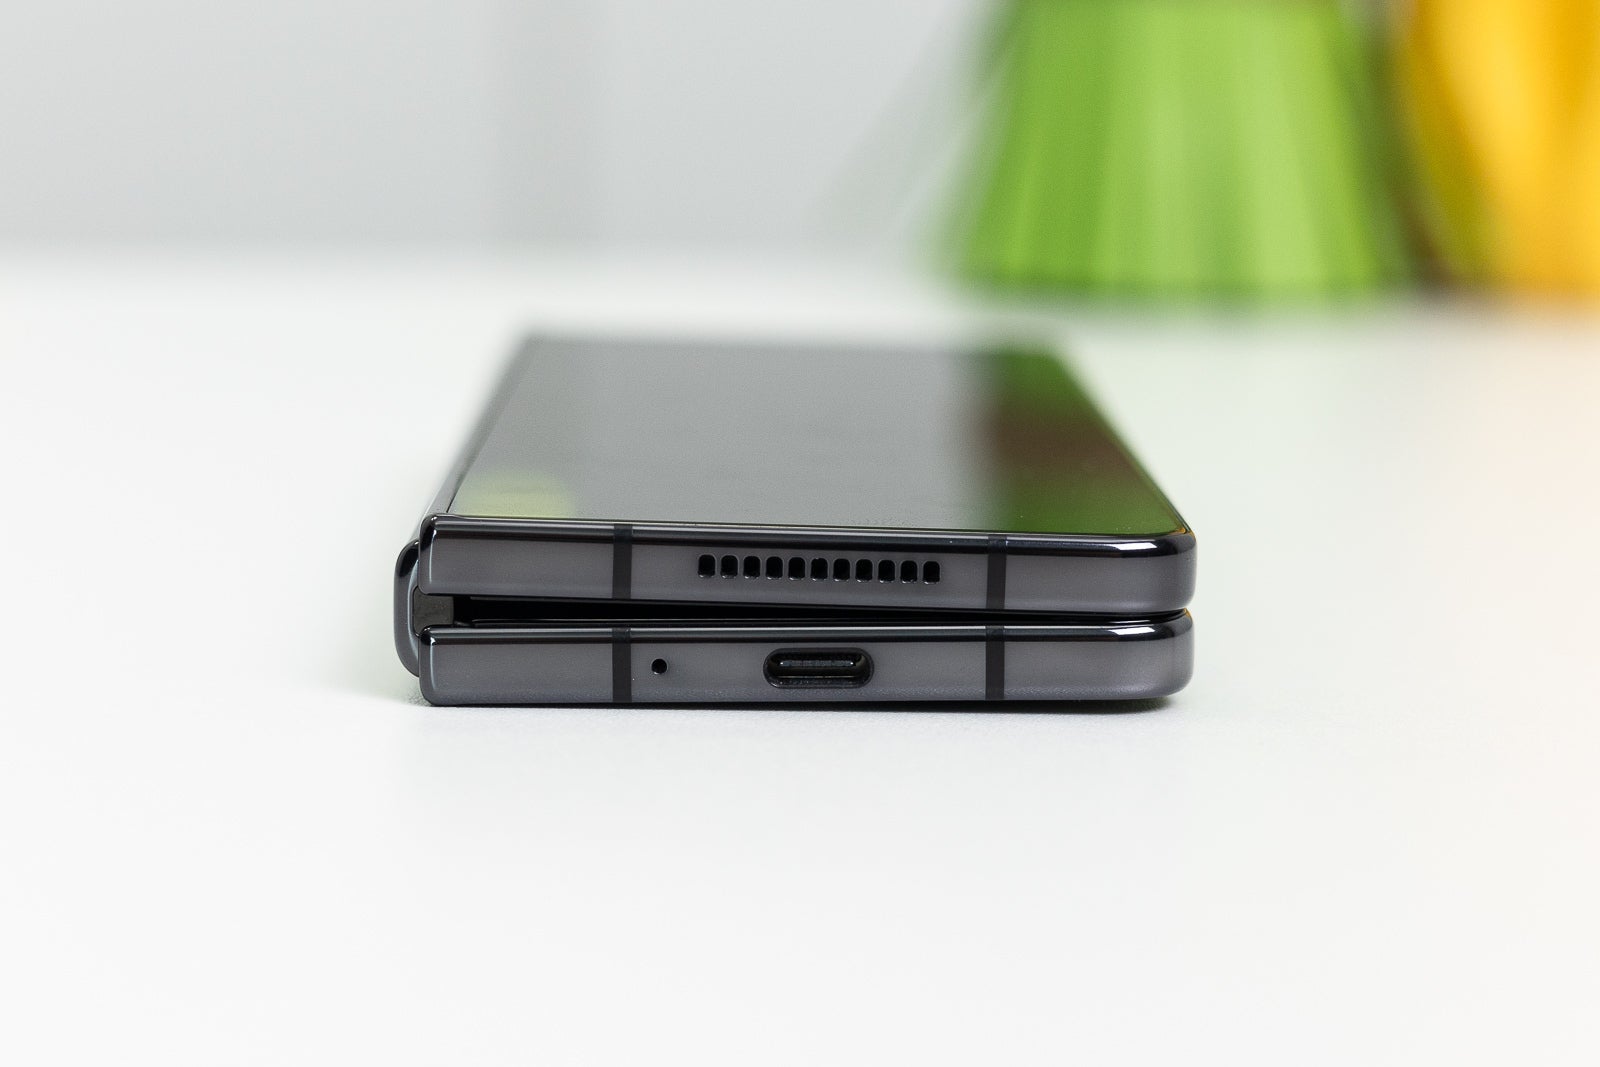 (Image credit - PhoneArena) Galaxy Z Fold 4 speaker grill and USB Type-C port - Galaxy Z Fold 4 review: key advantages